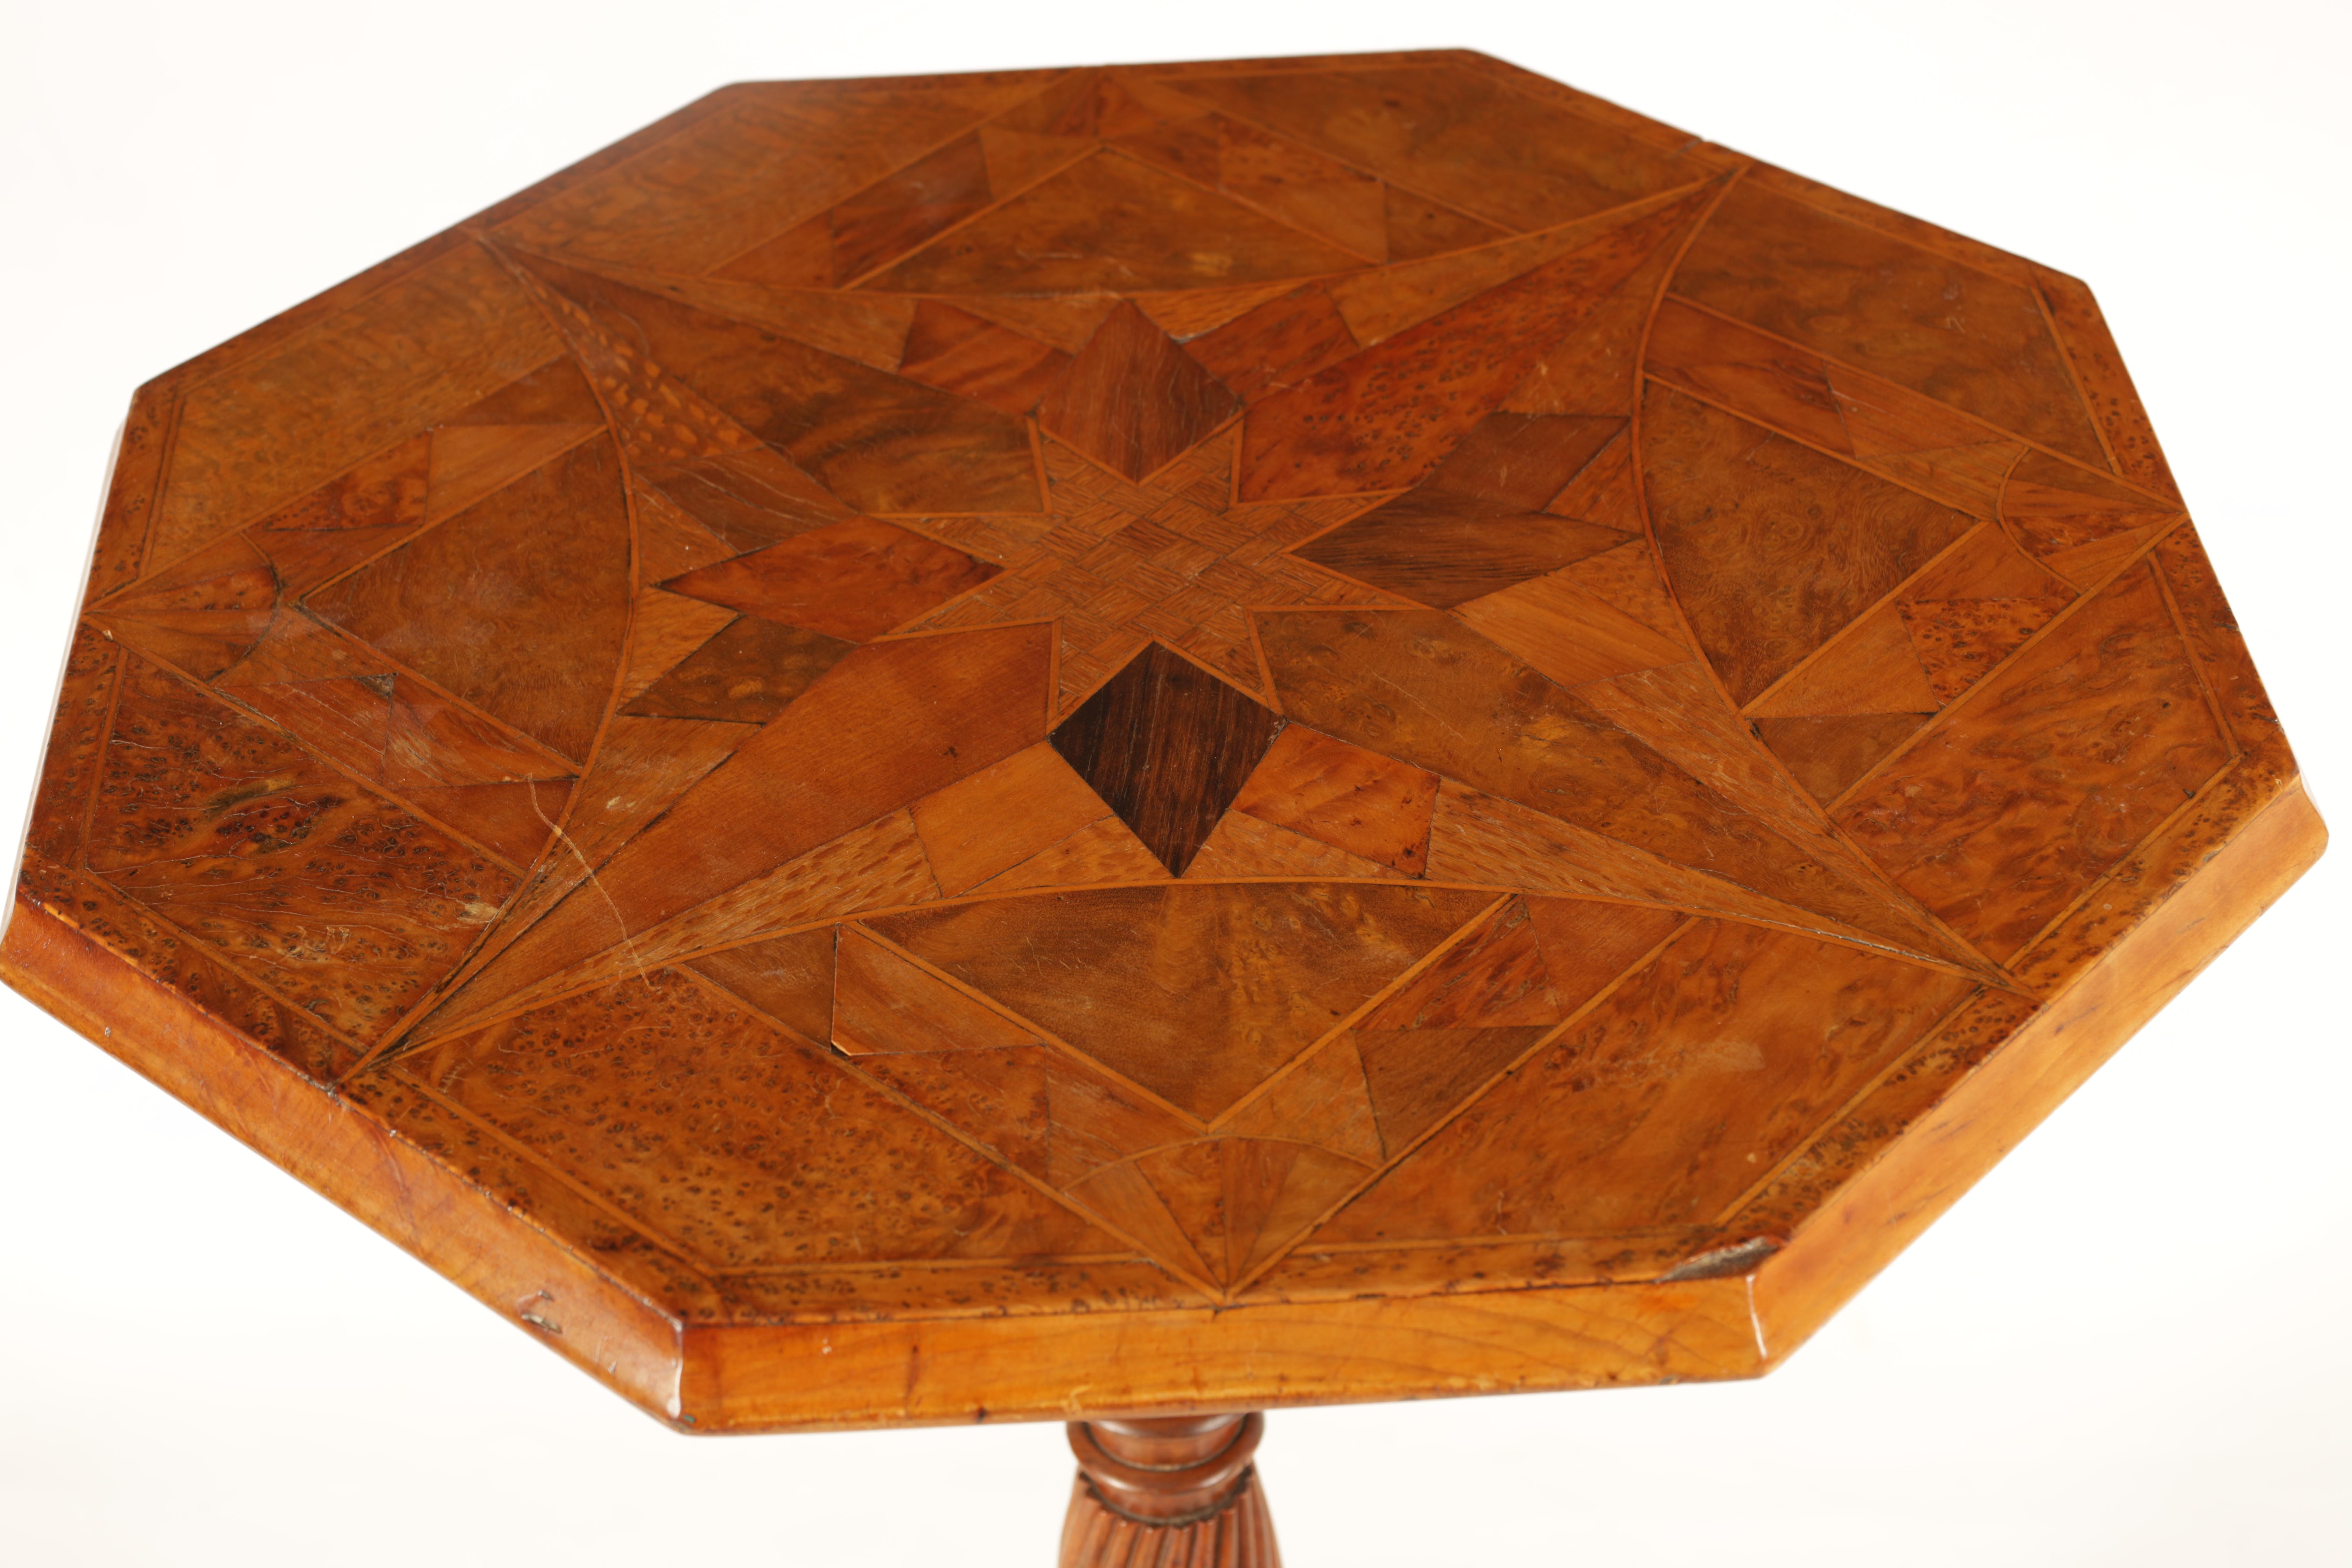 A LATE 19TH CENTURY WILLIAM NORRIE NEW ZEALAND SPECIMEN TABLE having an octagonal top inlaid with - Image 3 of 7